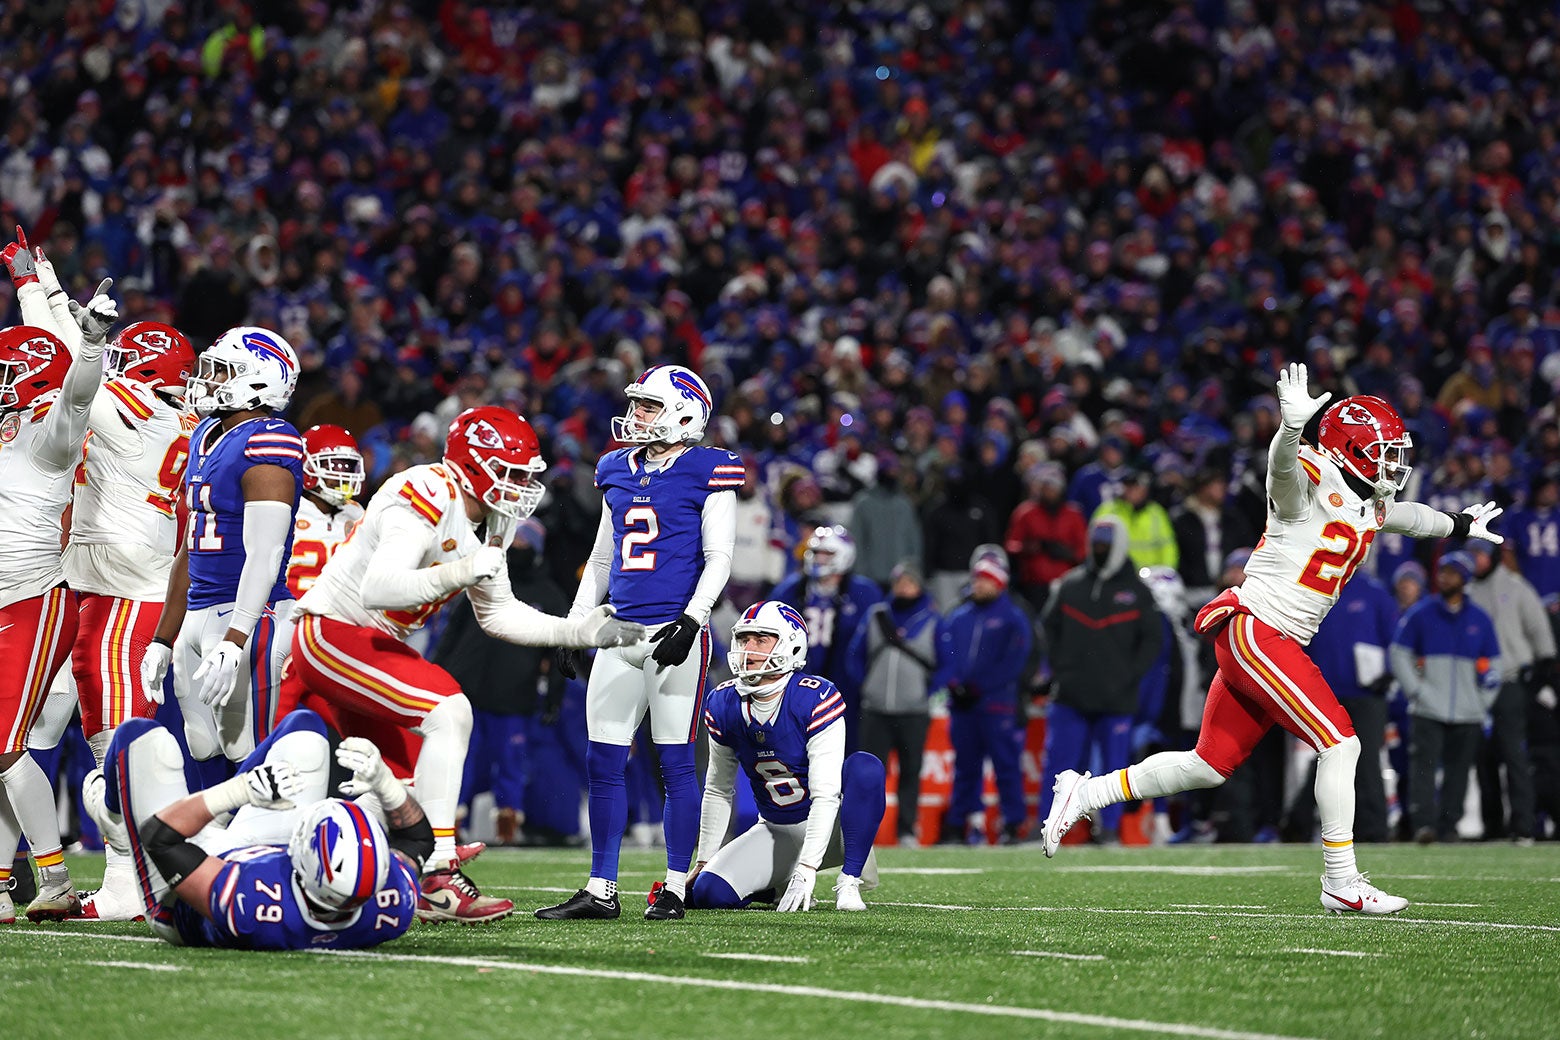 Bills kicker Tyler Bass looks at the sky in disbelief after his missed field goal, the Chiefs celebrating around him, one player running with his arms spread out wide like he is flying.